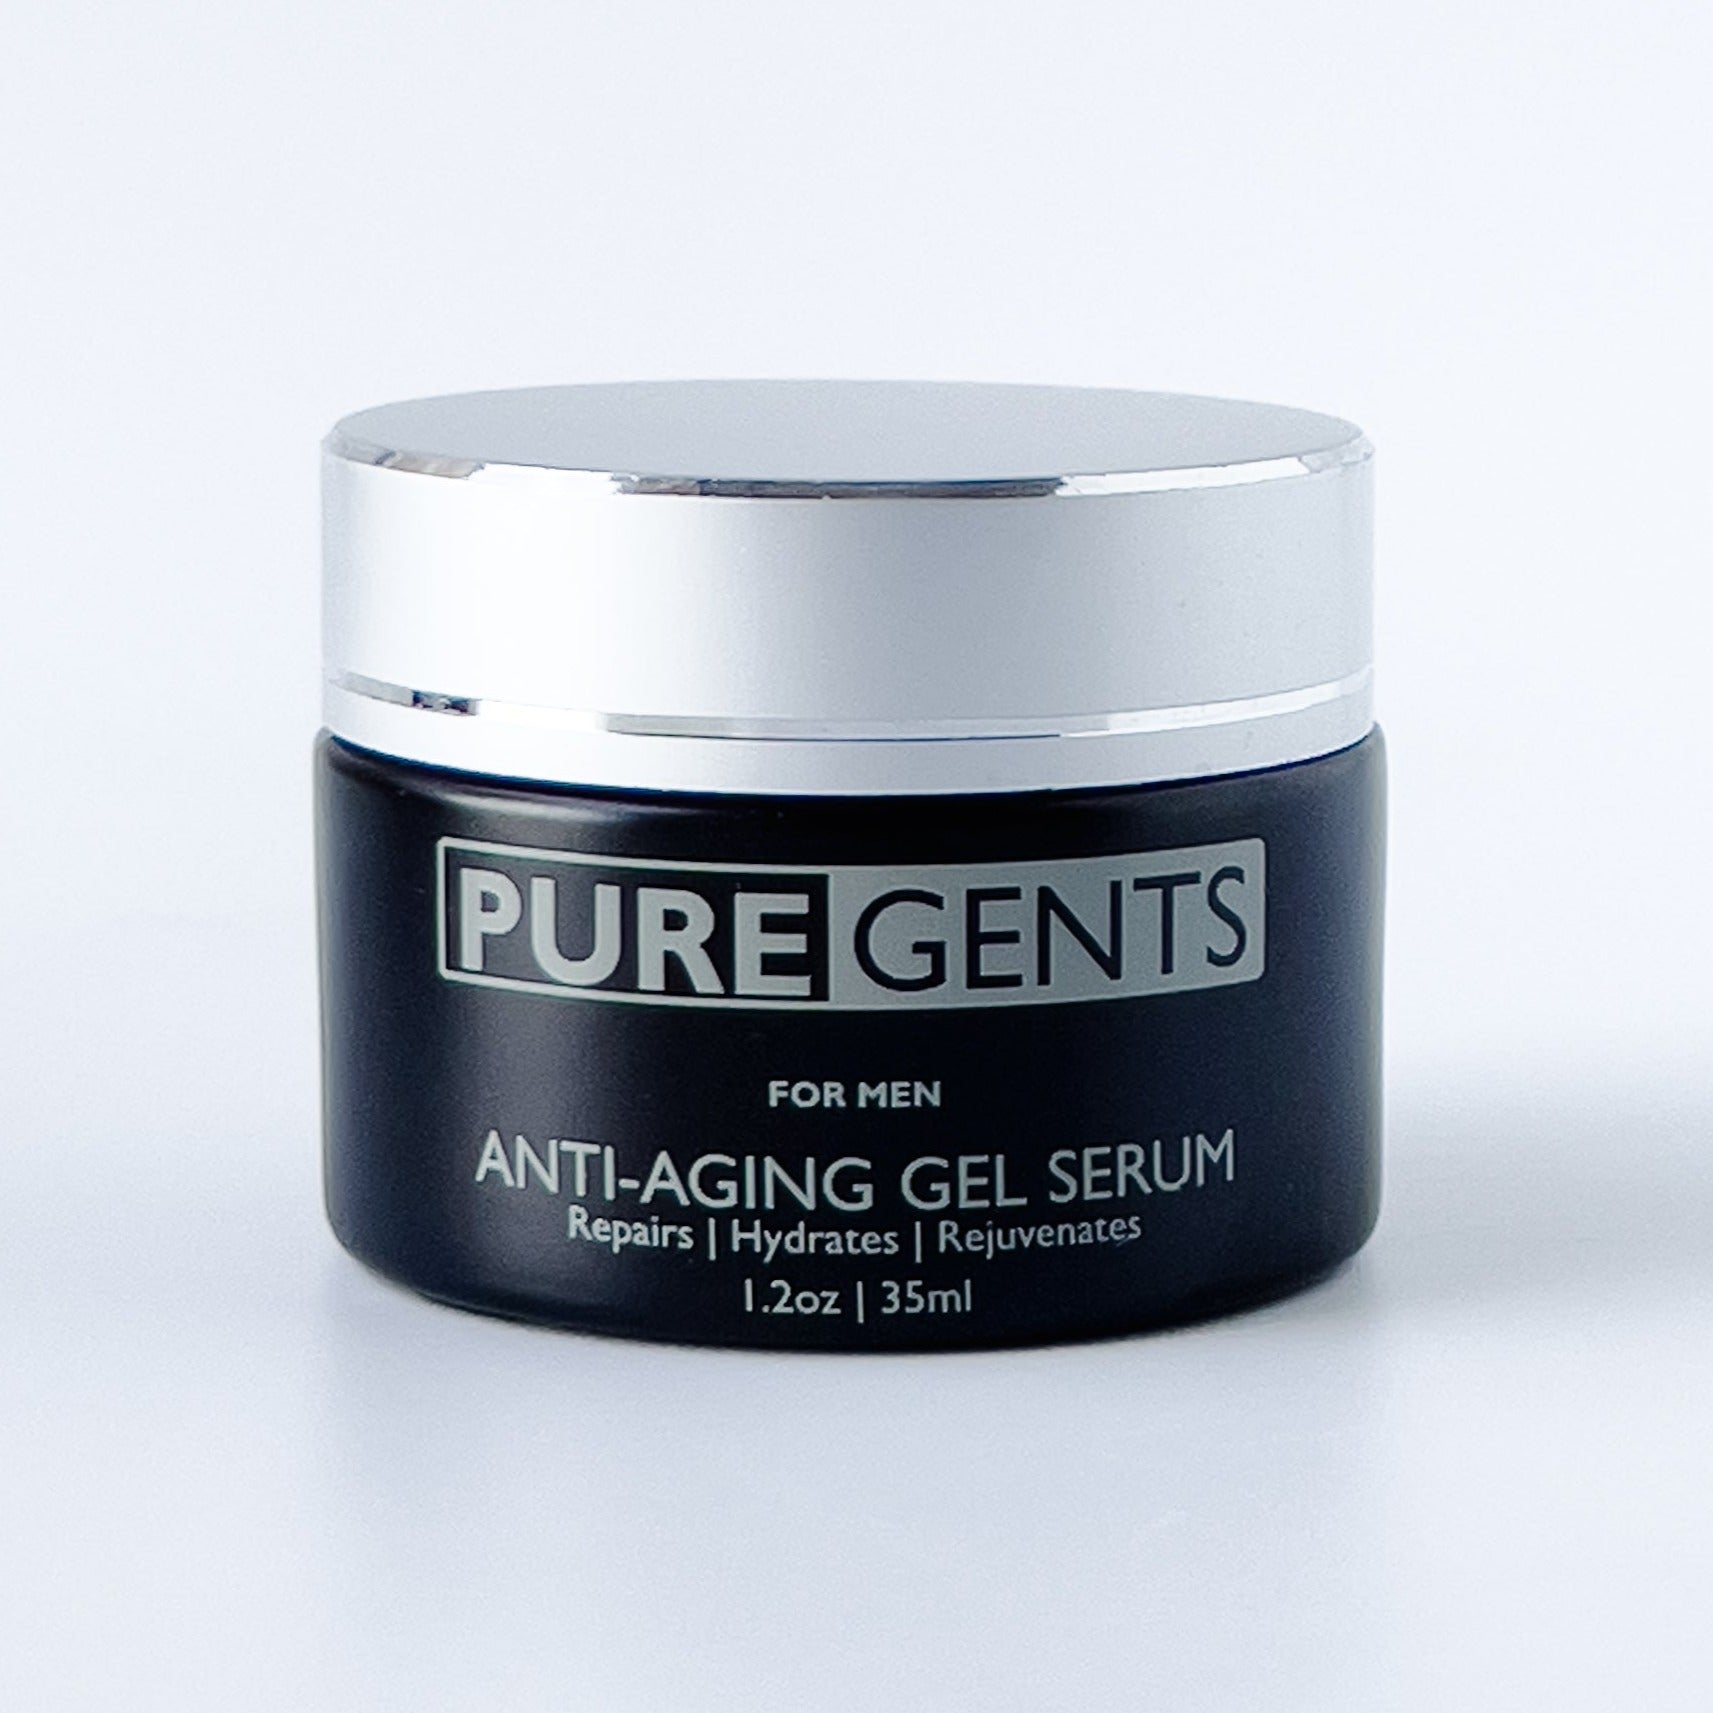 The PUREGENTS Anti-Aging Gel Serum is show. The tub is black with gray text and a silver top